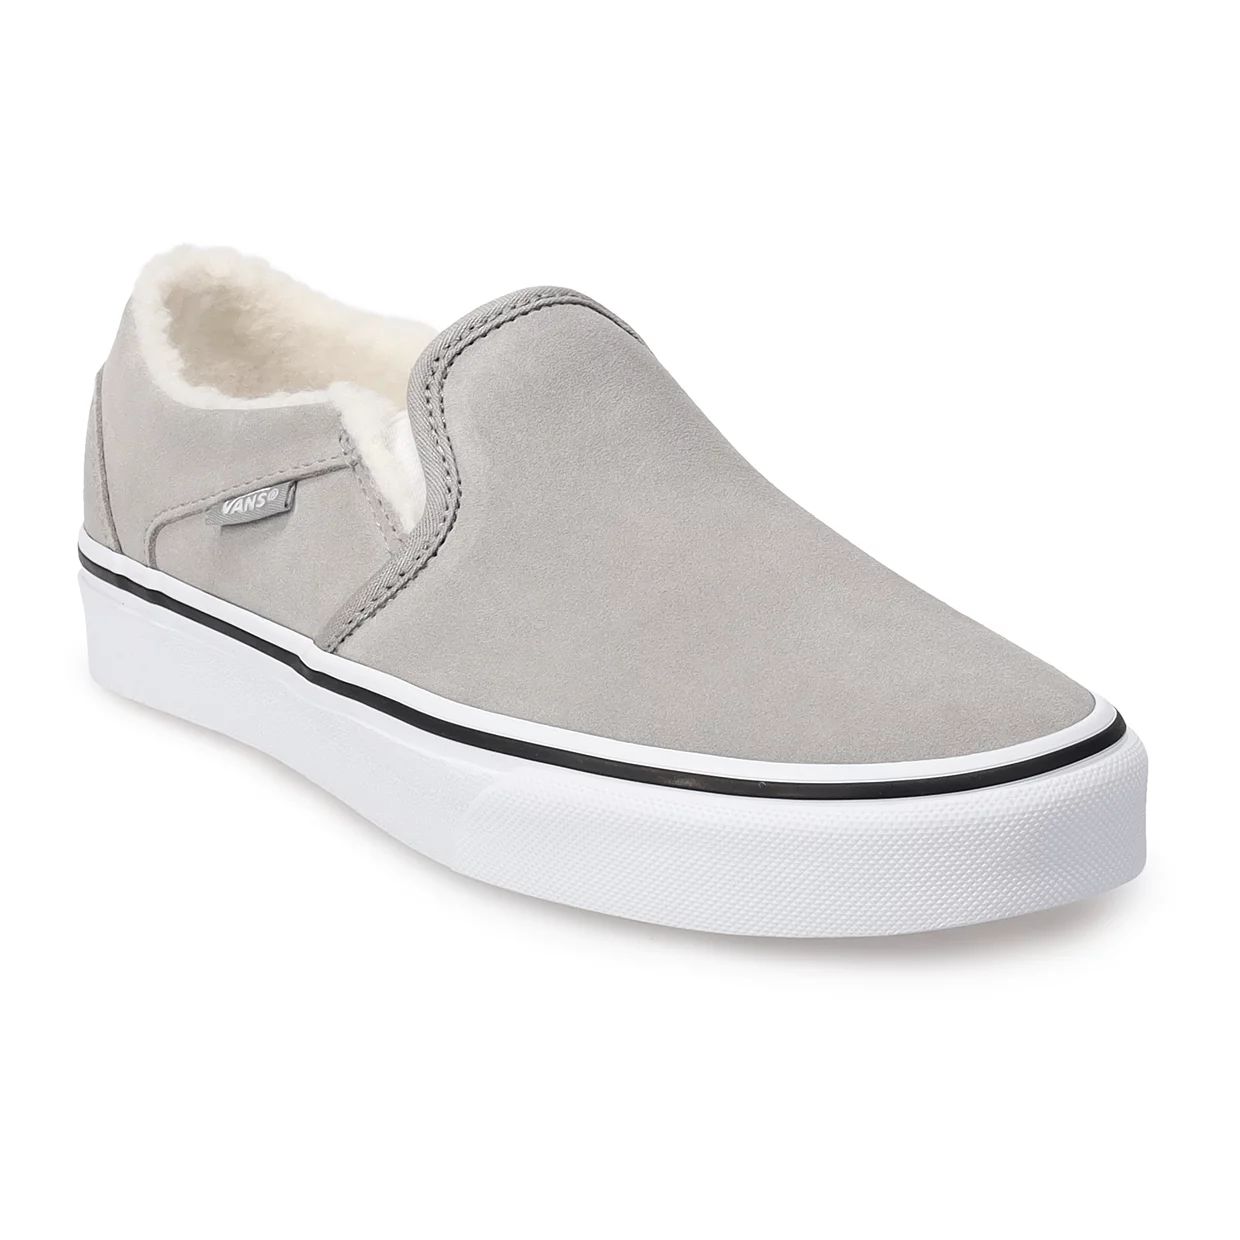 Vans® Asher Women's Suede Slip-On Shoes | Kohl's